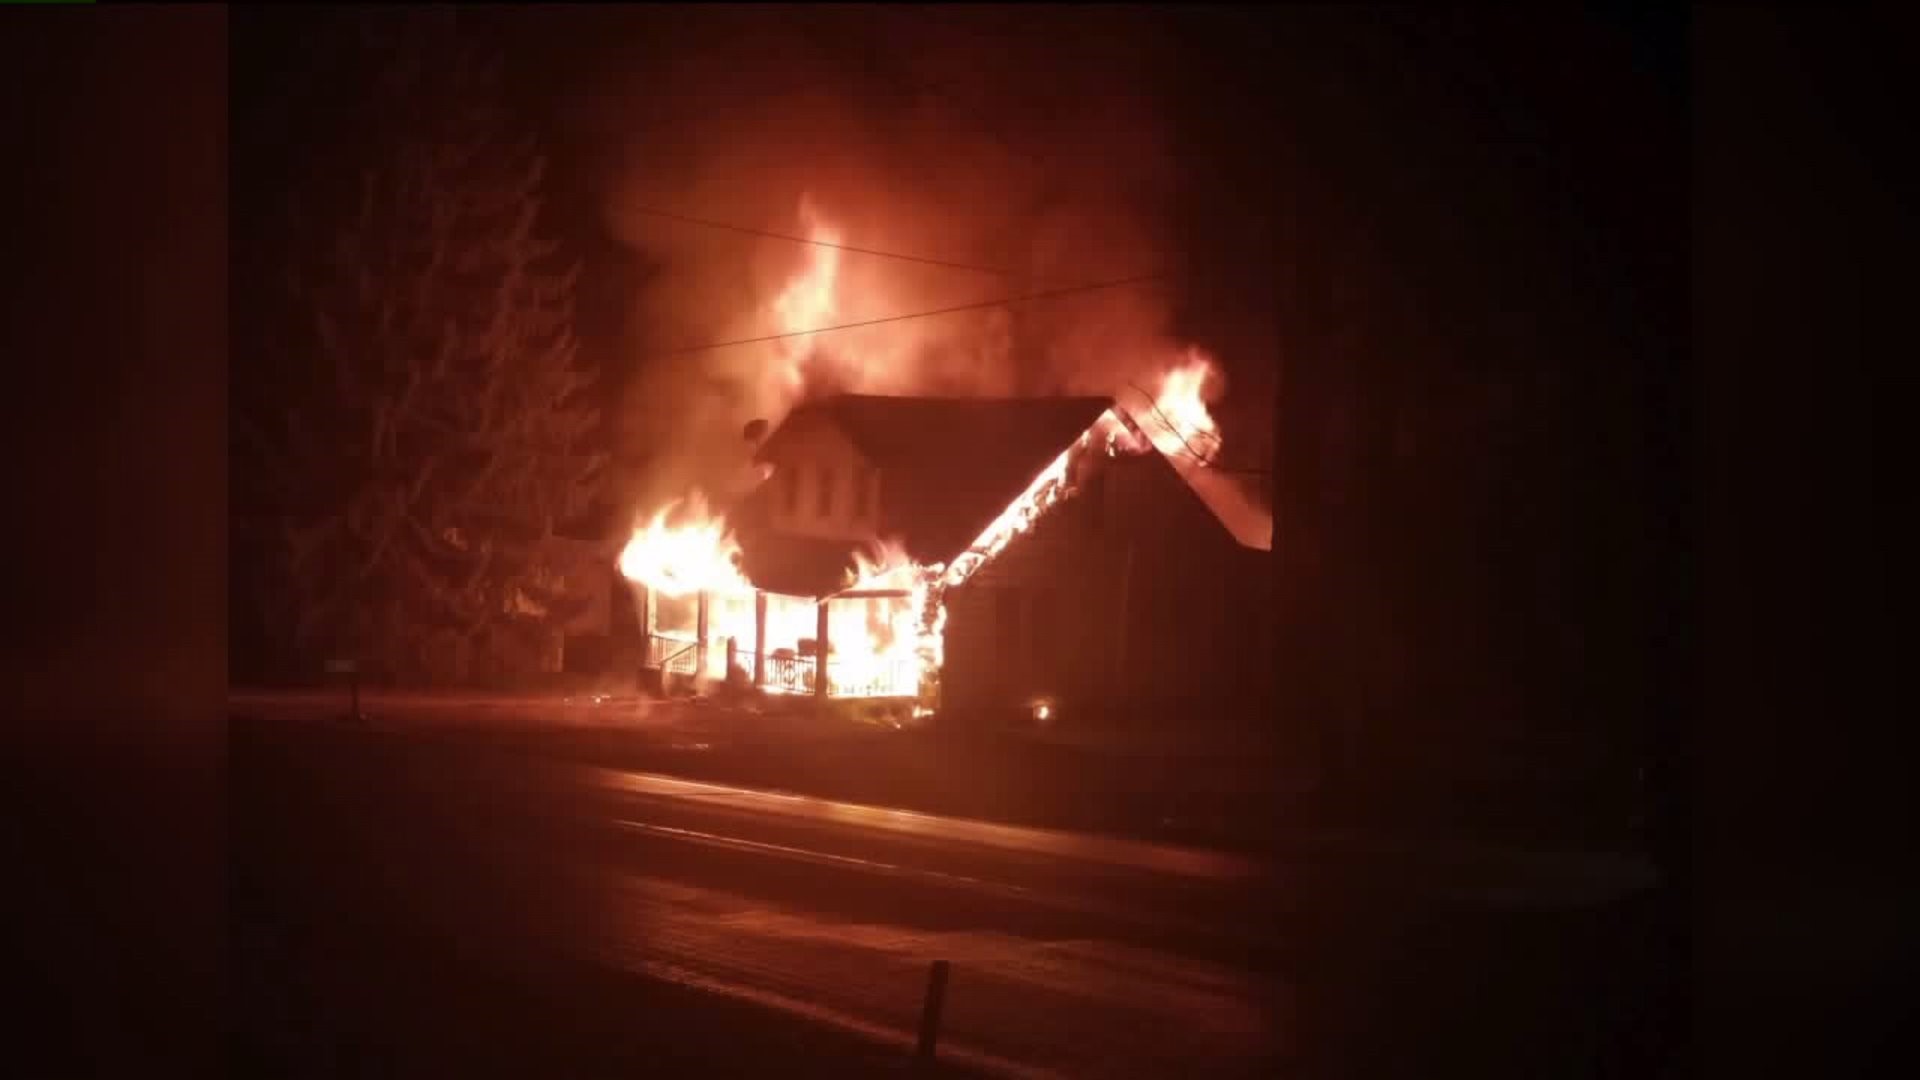 Home in Susquehanna County Ravaged by Fire